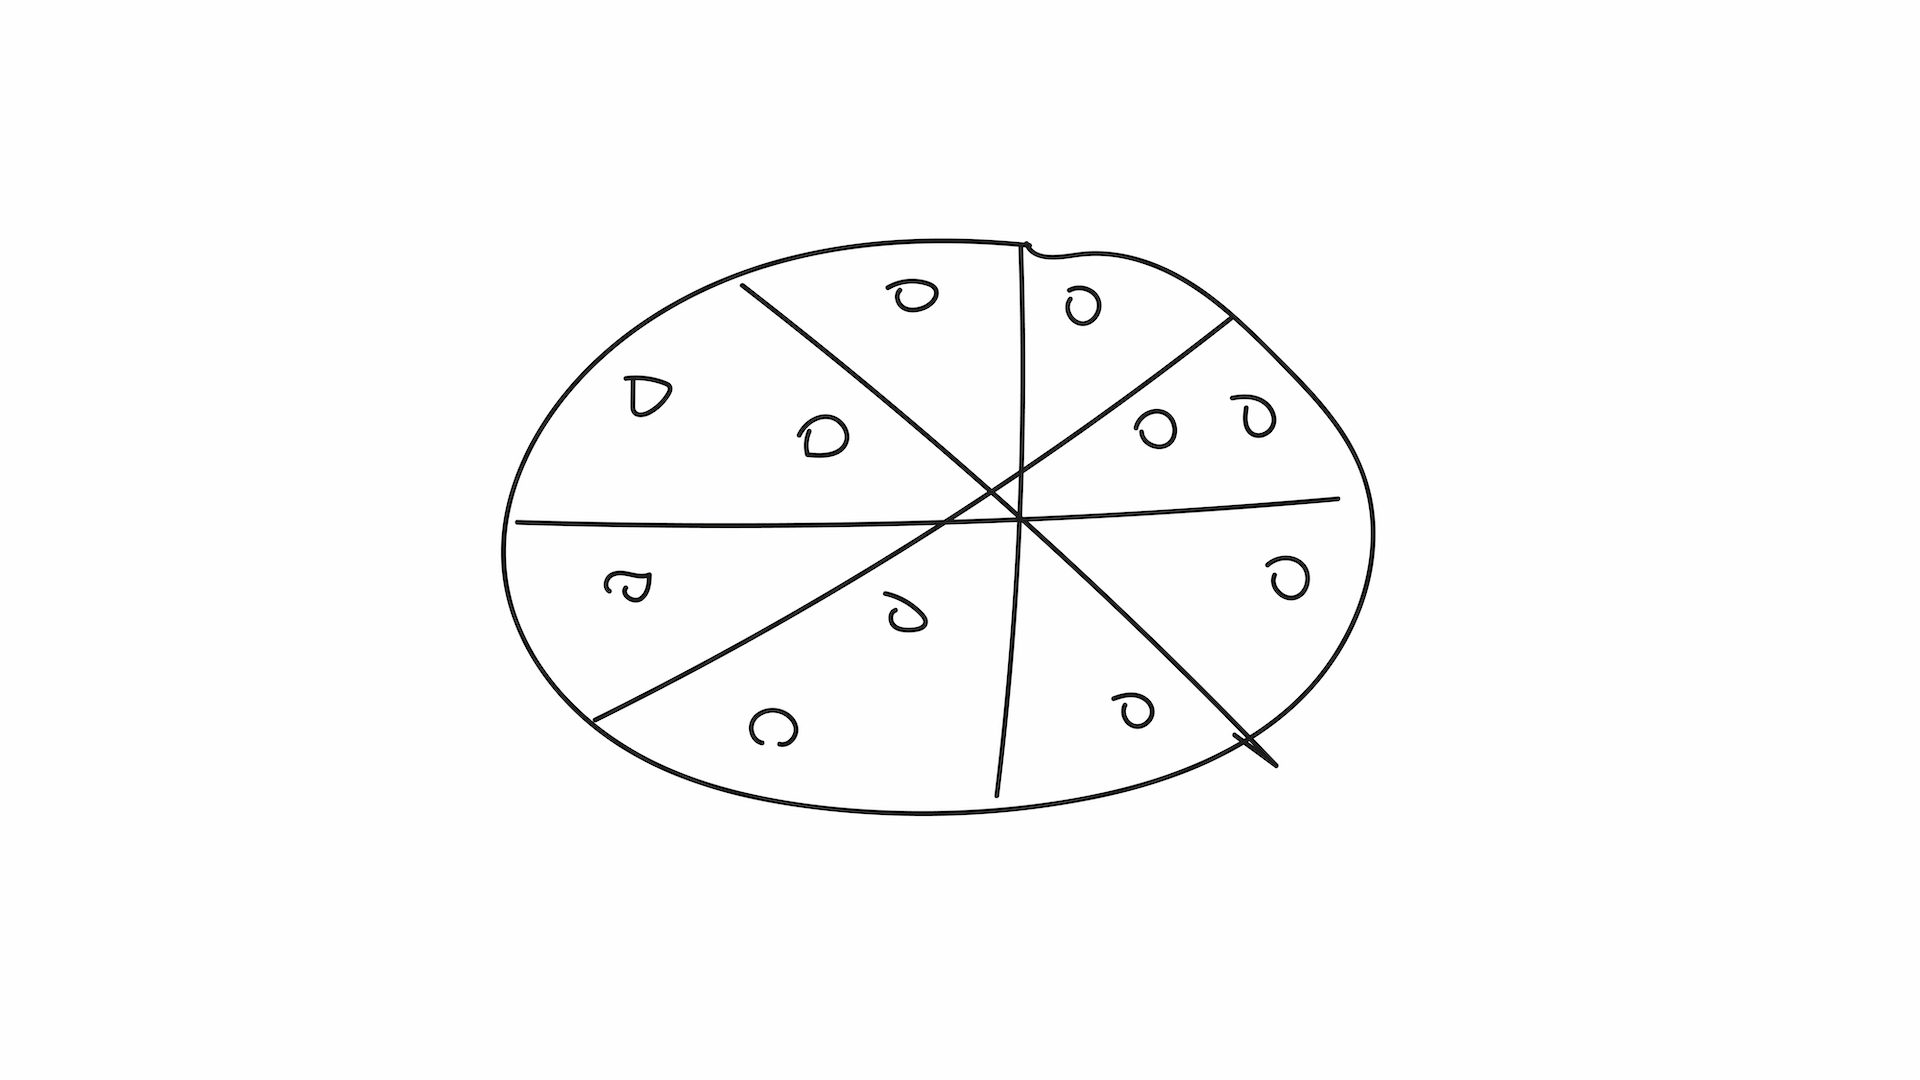 A circle split into sections and covered with smaller circles